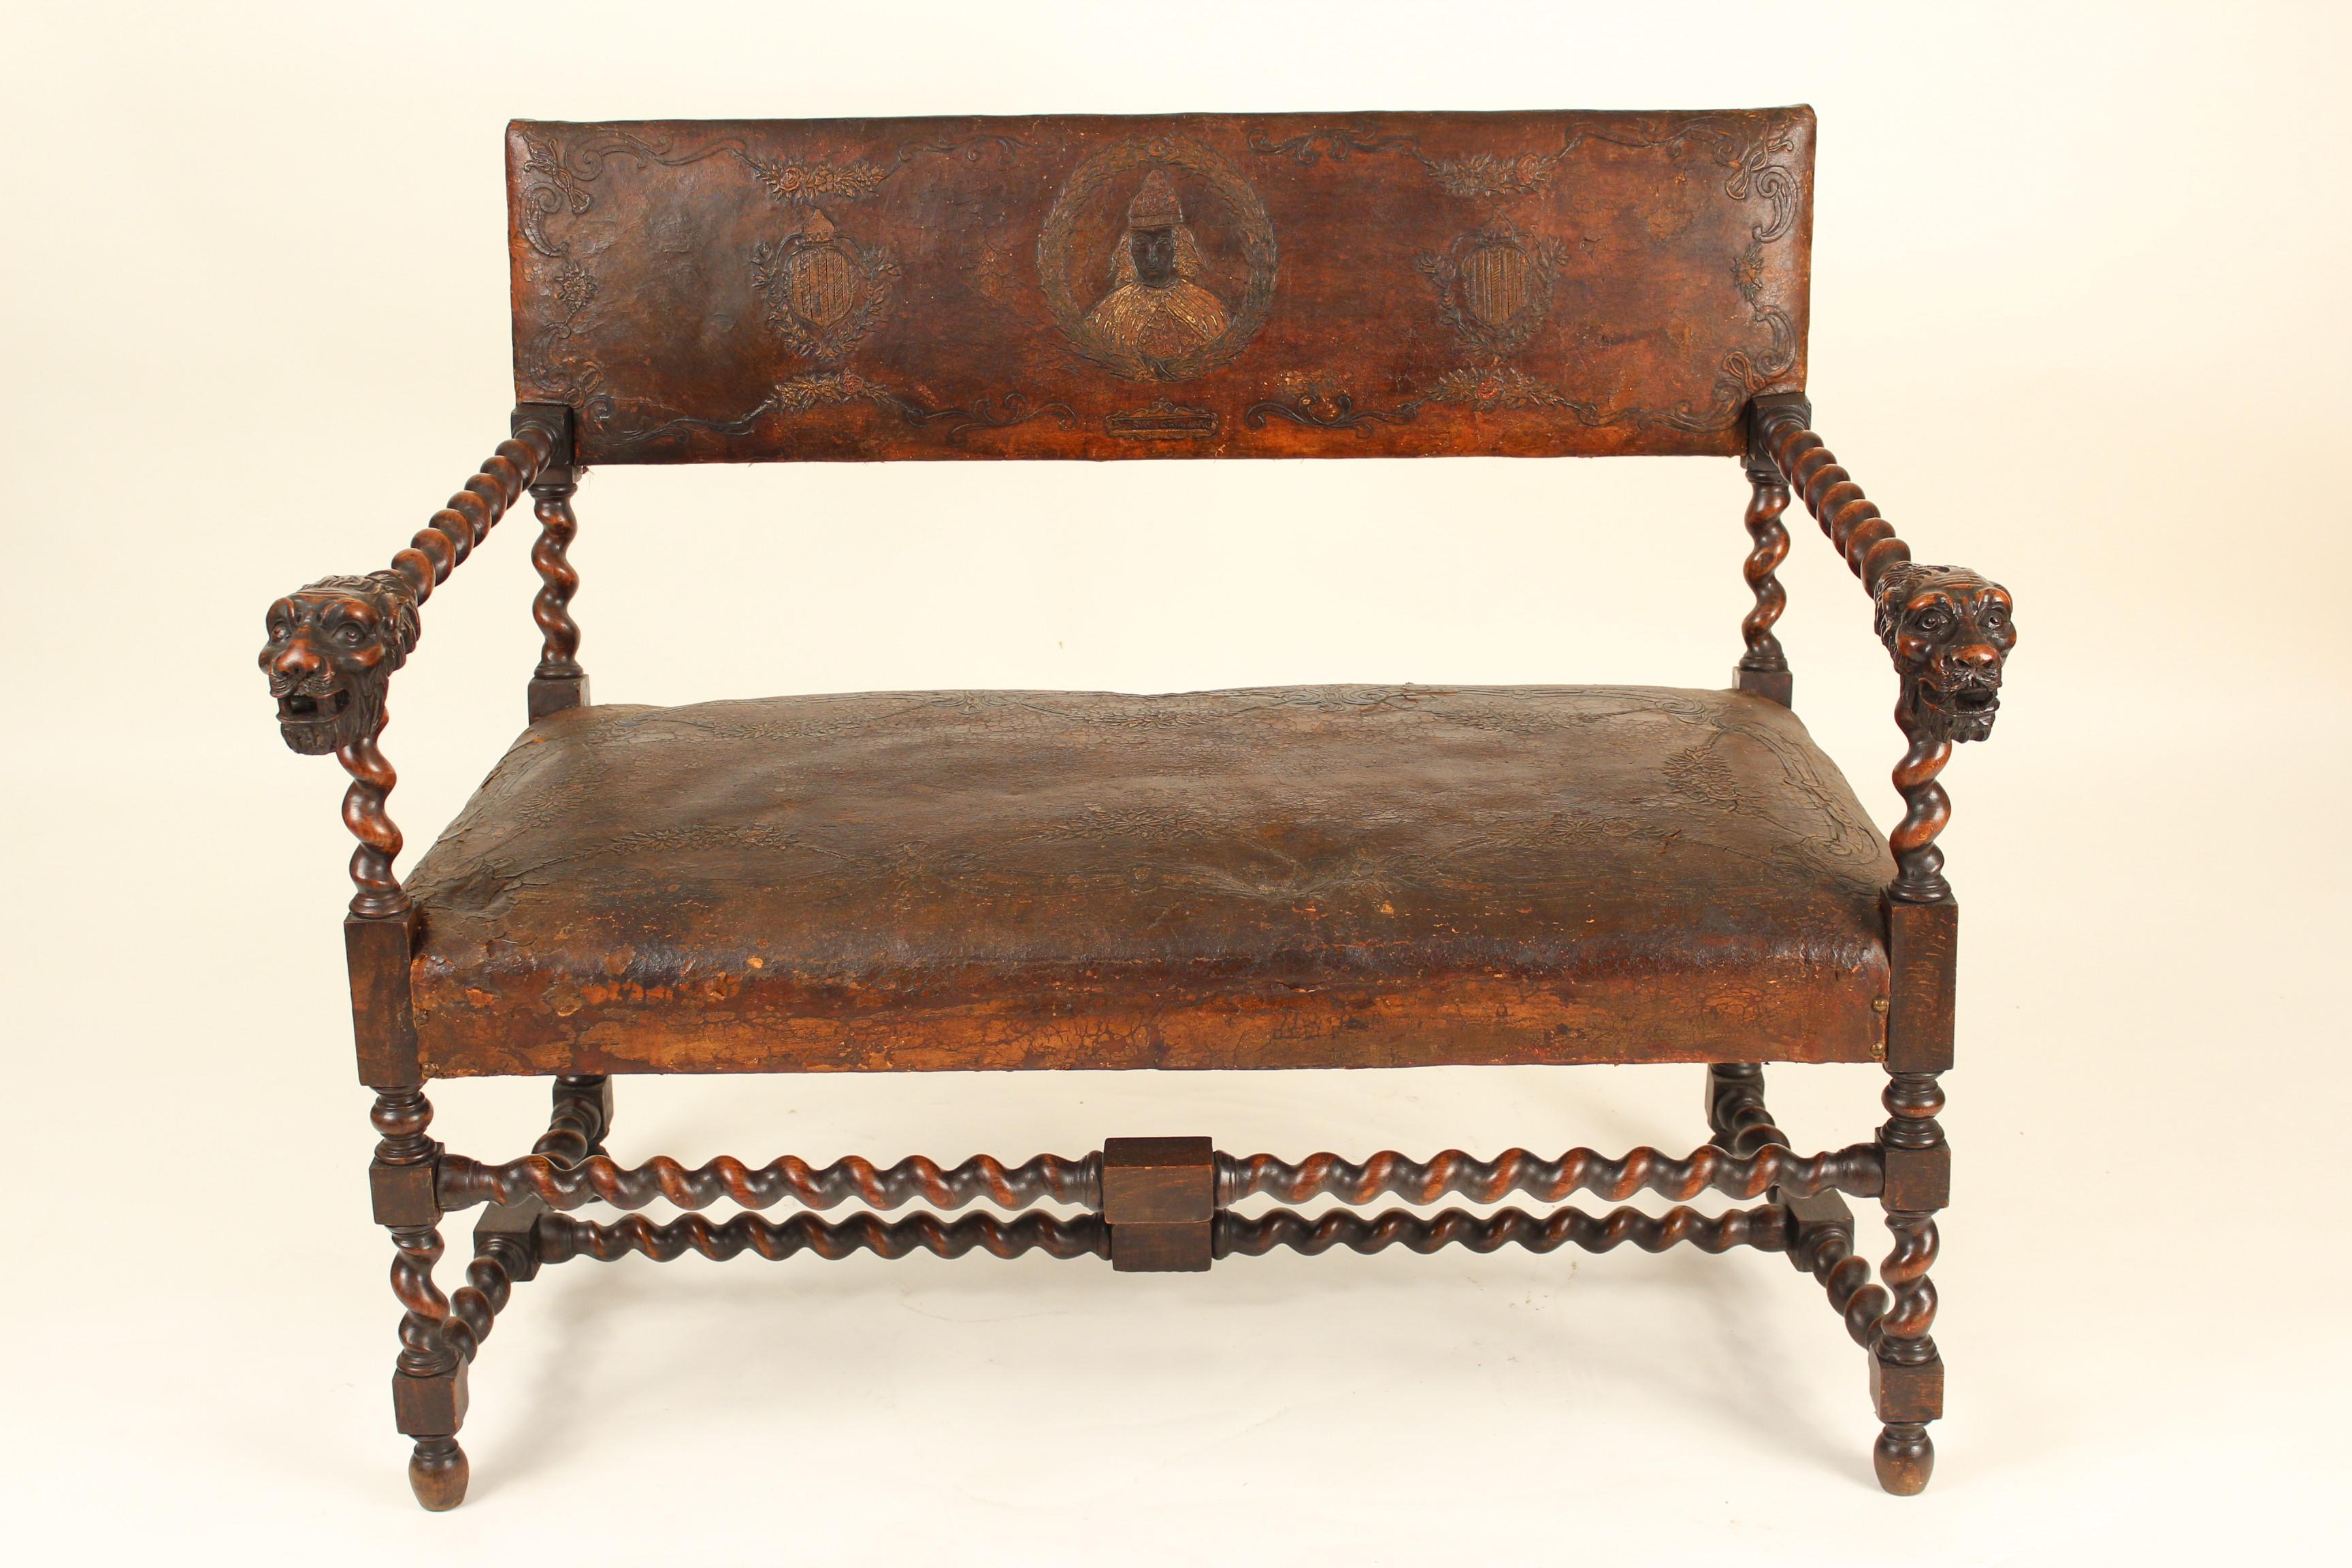 Louis XIII style carved beech wood settee, circa 1890-1910. This settee has original embossed leather upholstery, great lion carved arms, turned legs and stretcher bars.